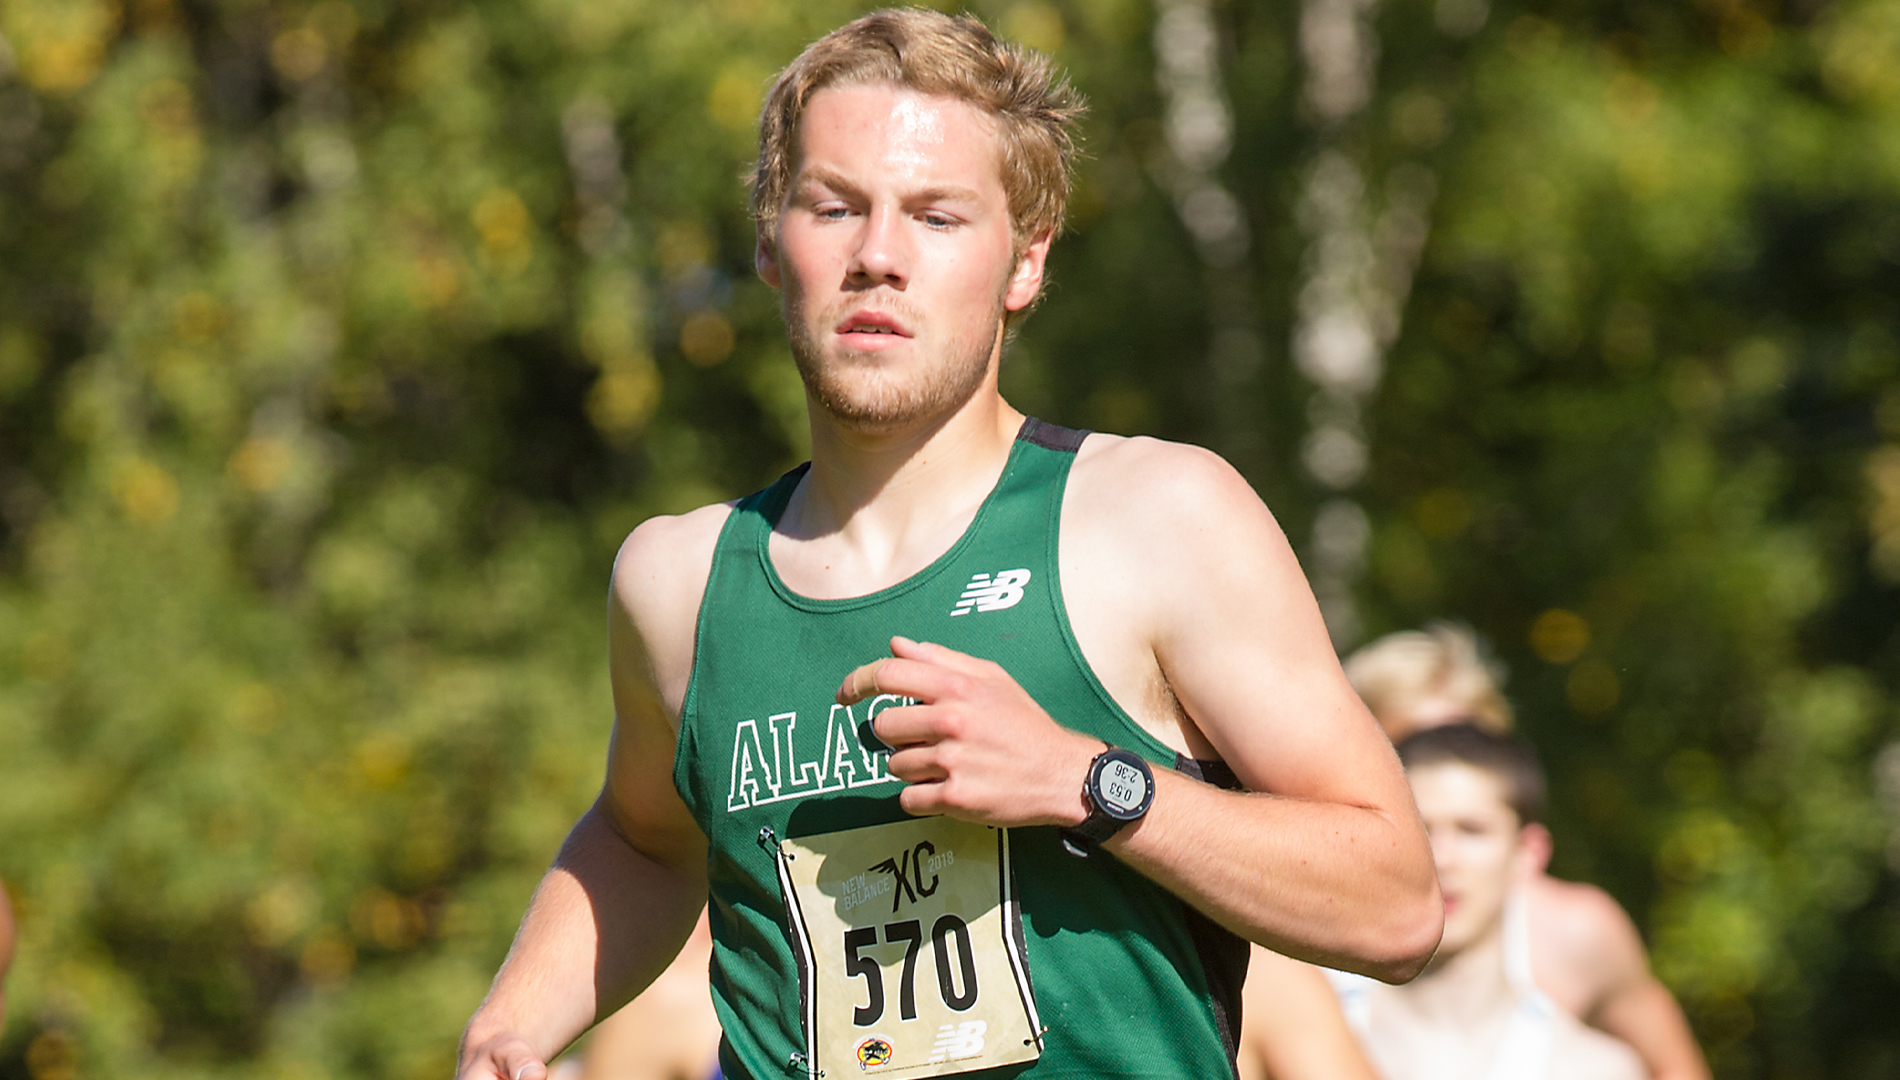 Jacob Moos of Galena leads the Alaskaraised contingent for UAA at GNAC